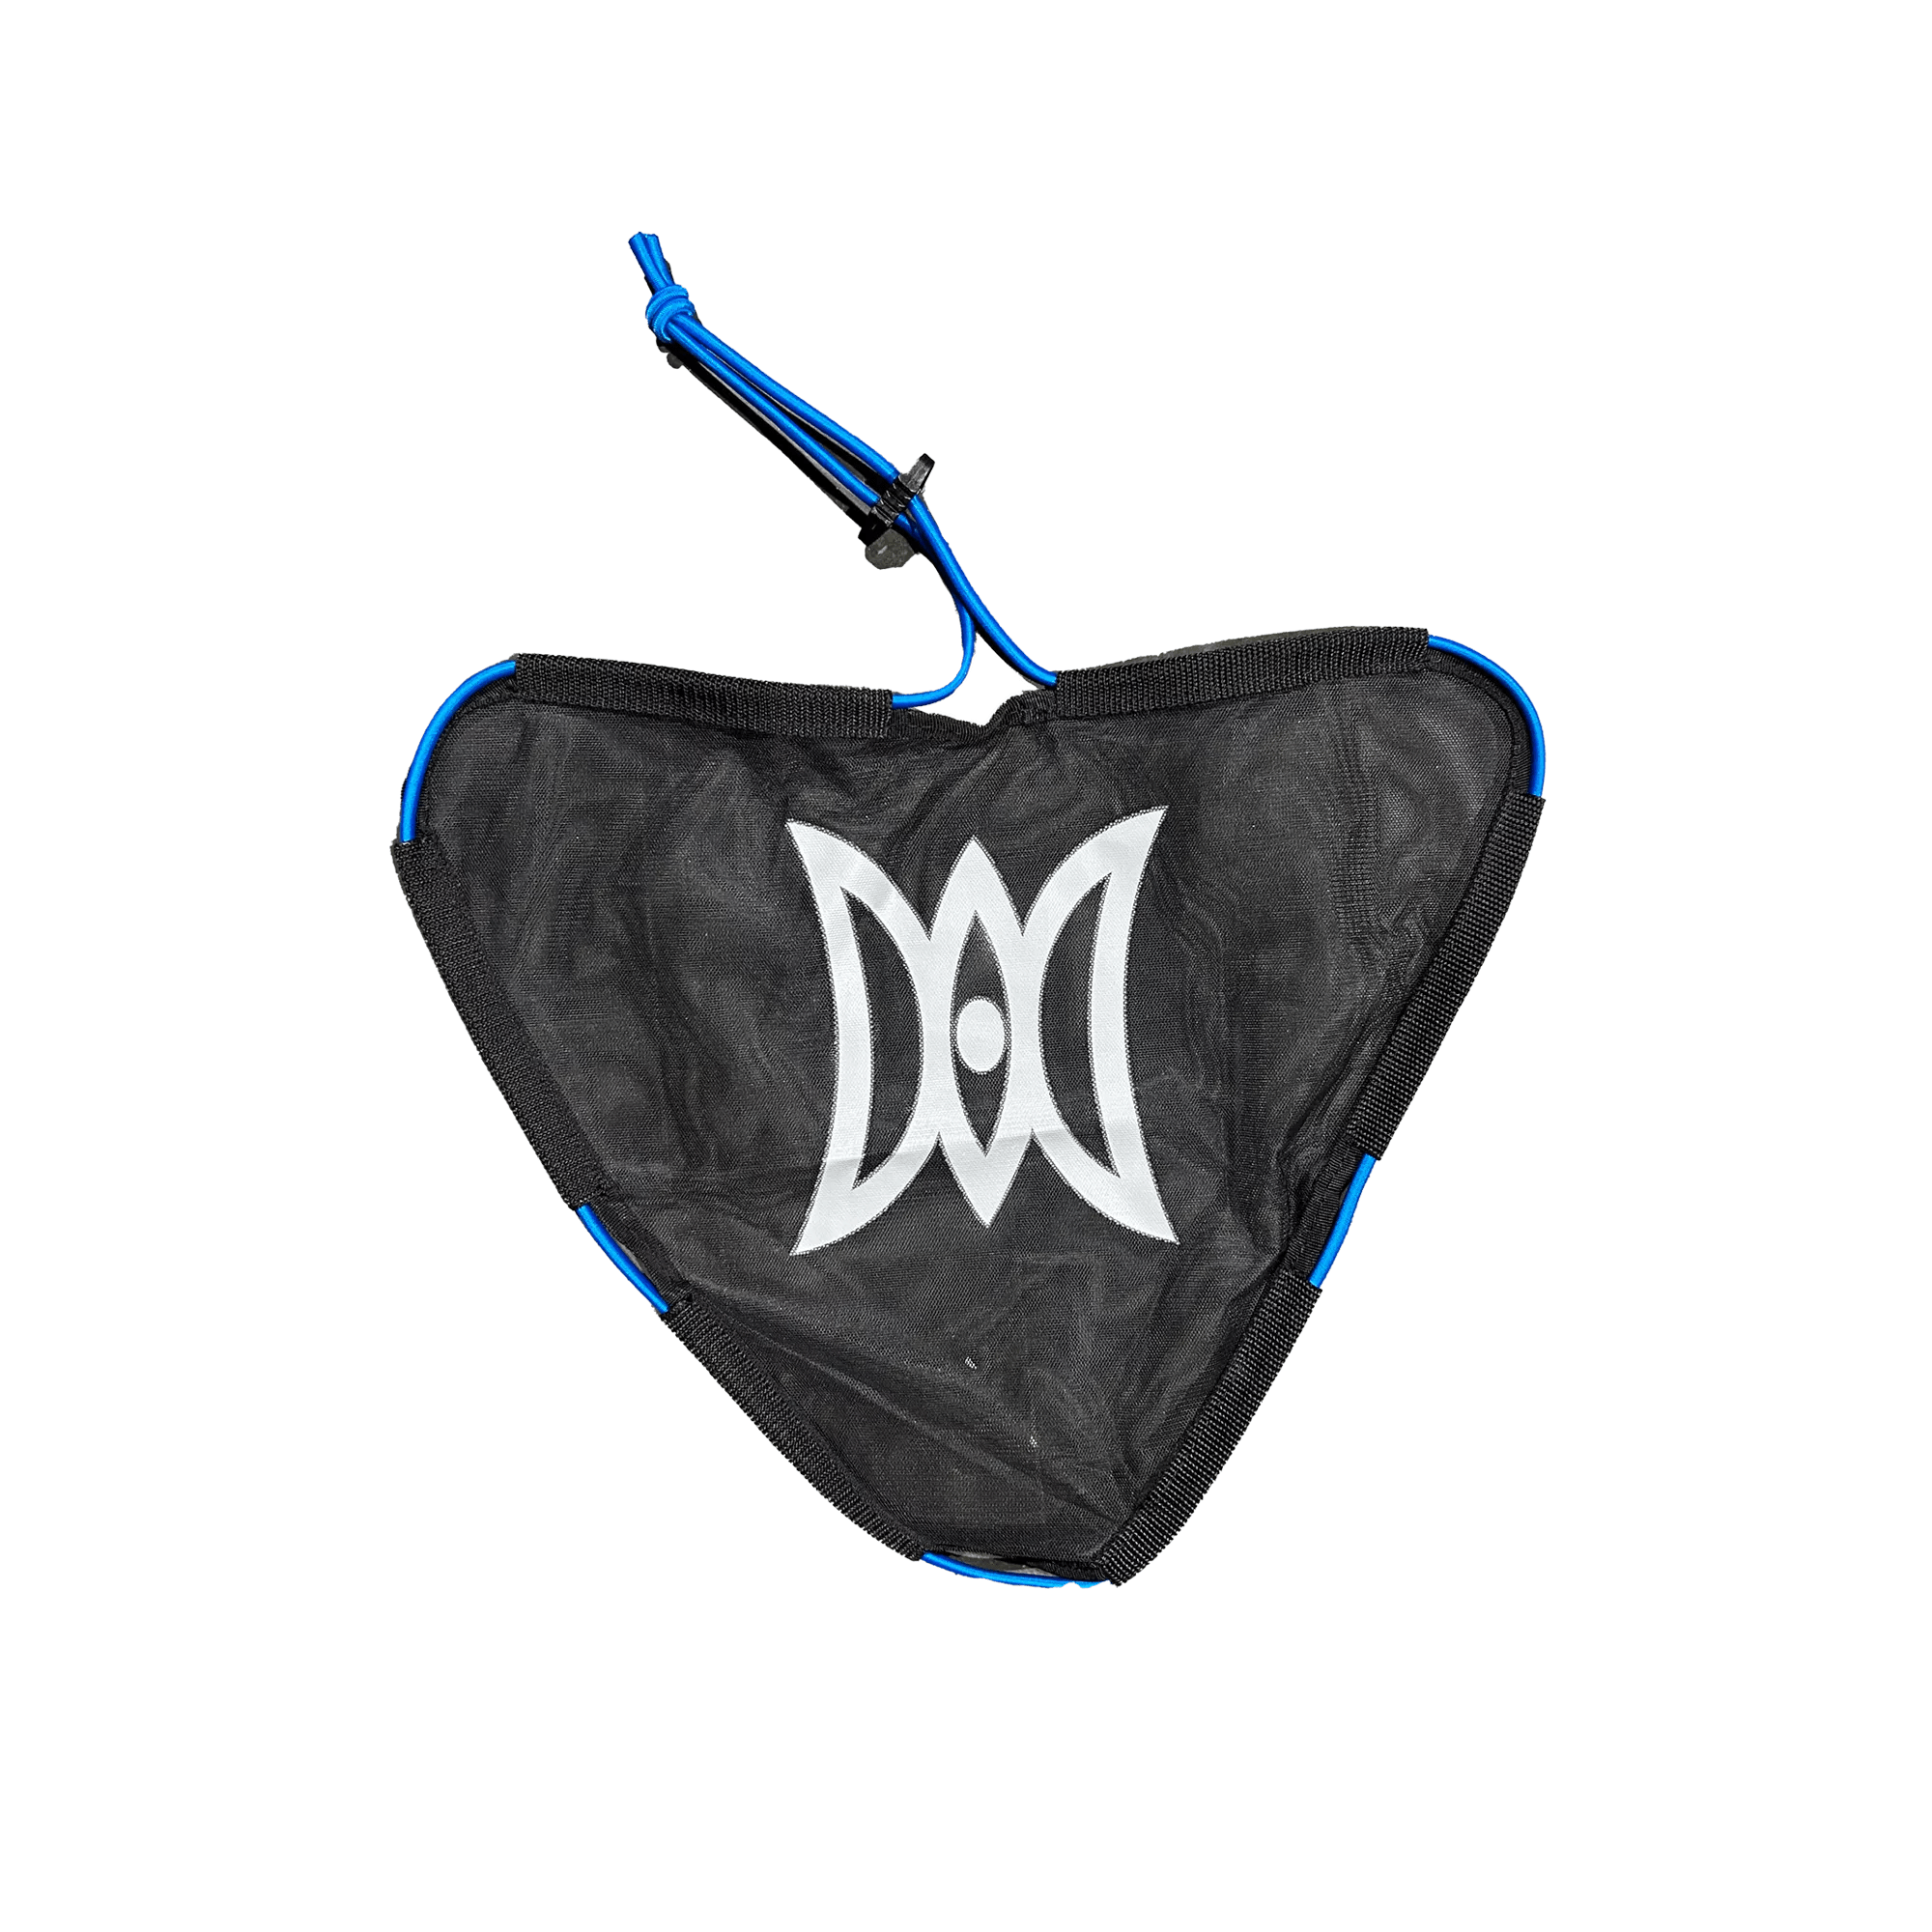 PERCEPTION - Small Bow Mesh with Blue Bungee - Pescador Pro/Pilot -  - 9801156 - 